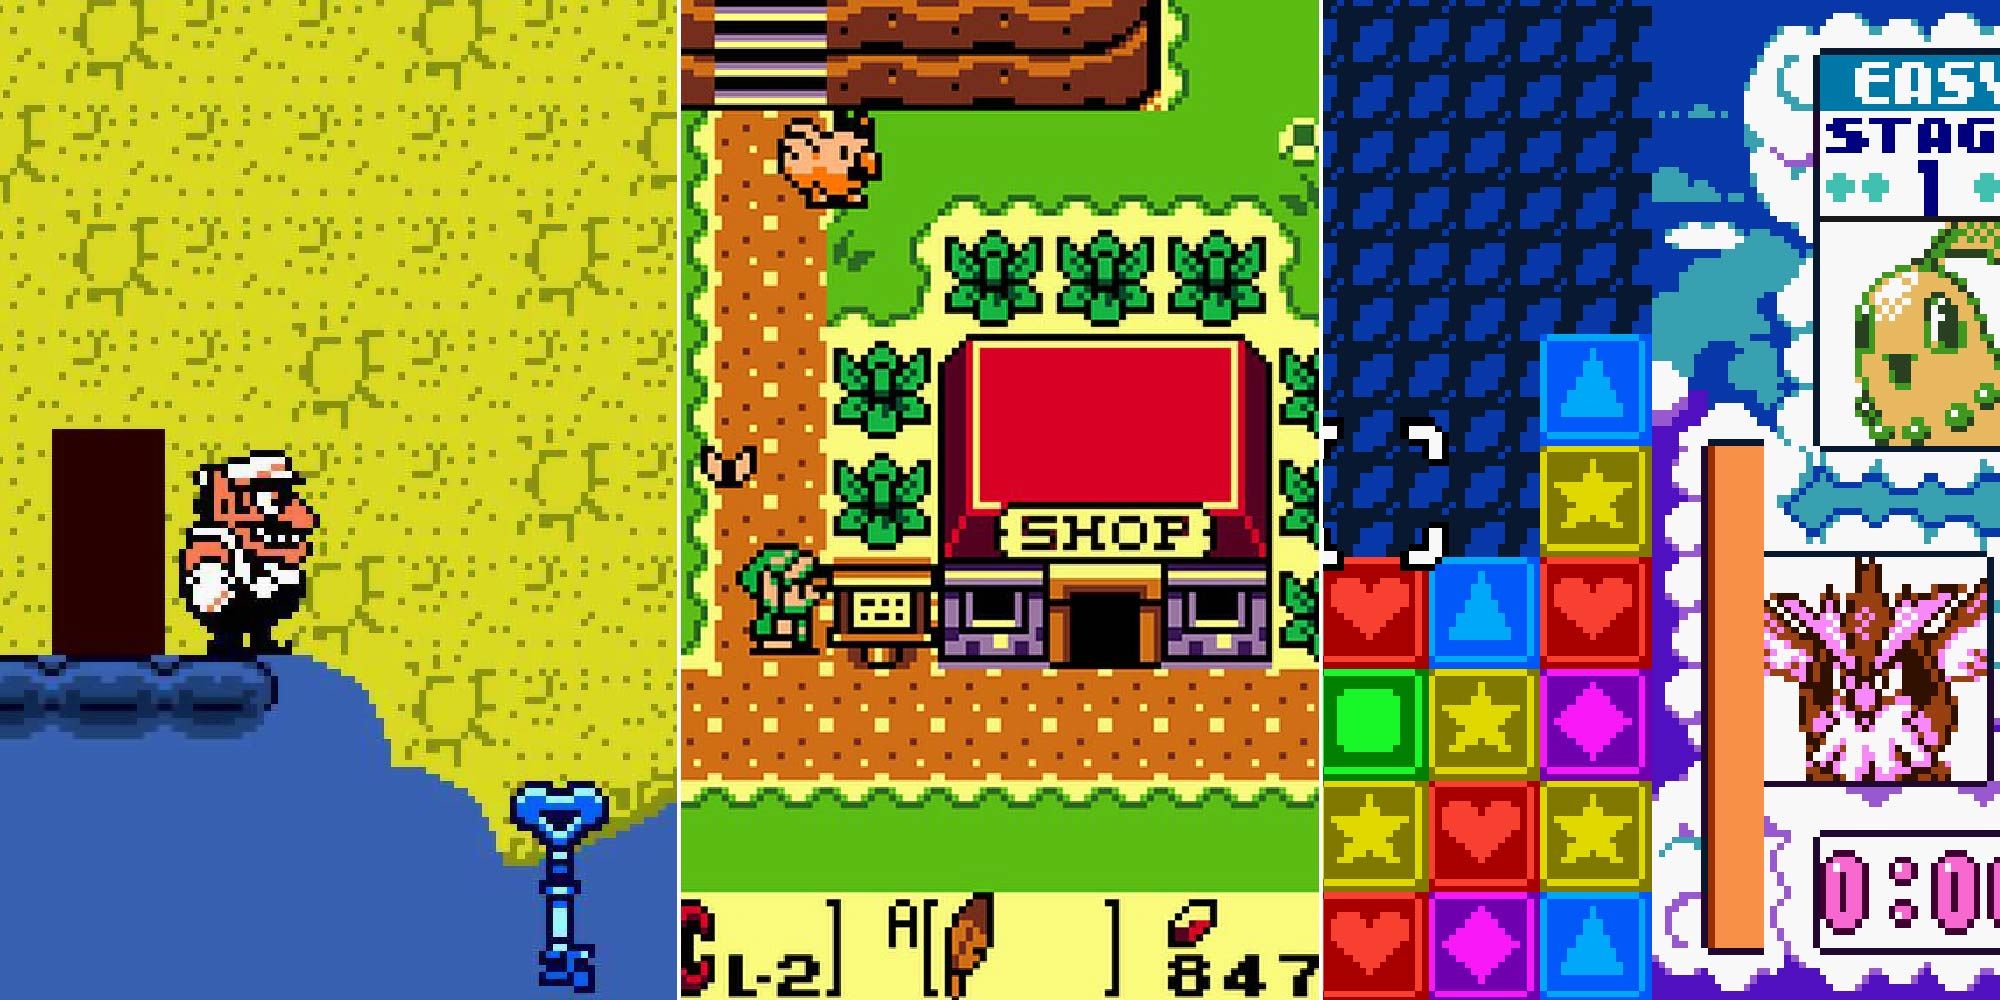 A split image featuring screenshots from Wario Land 3, Link's Awakening DX, and Pokemon Puzzle Challenge.